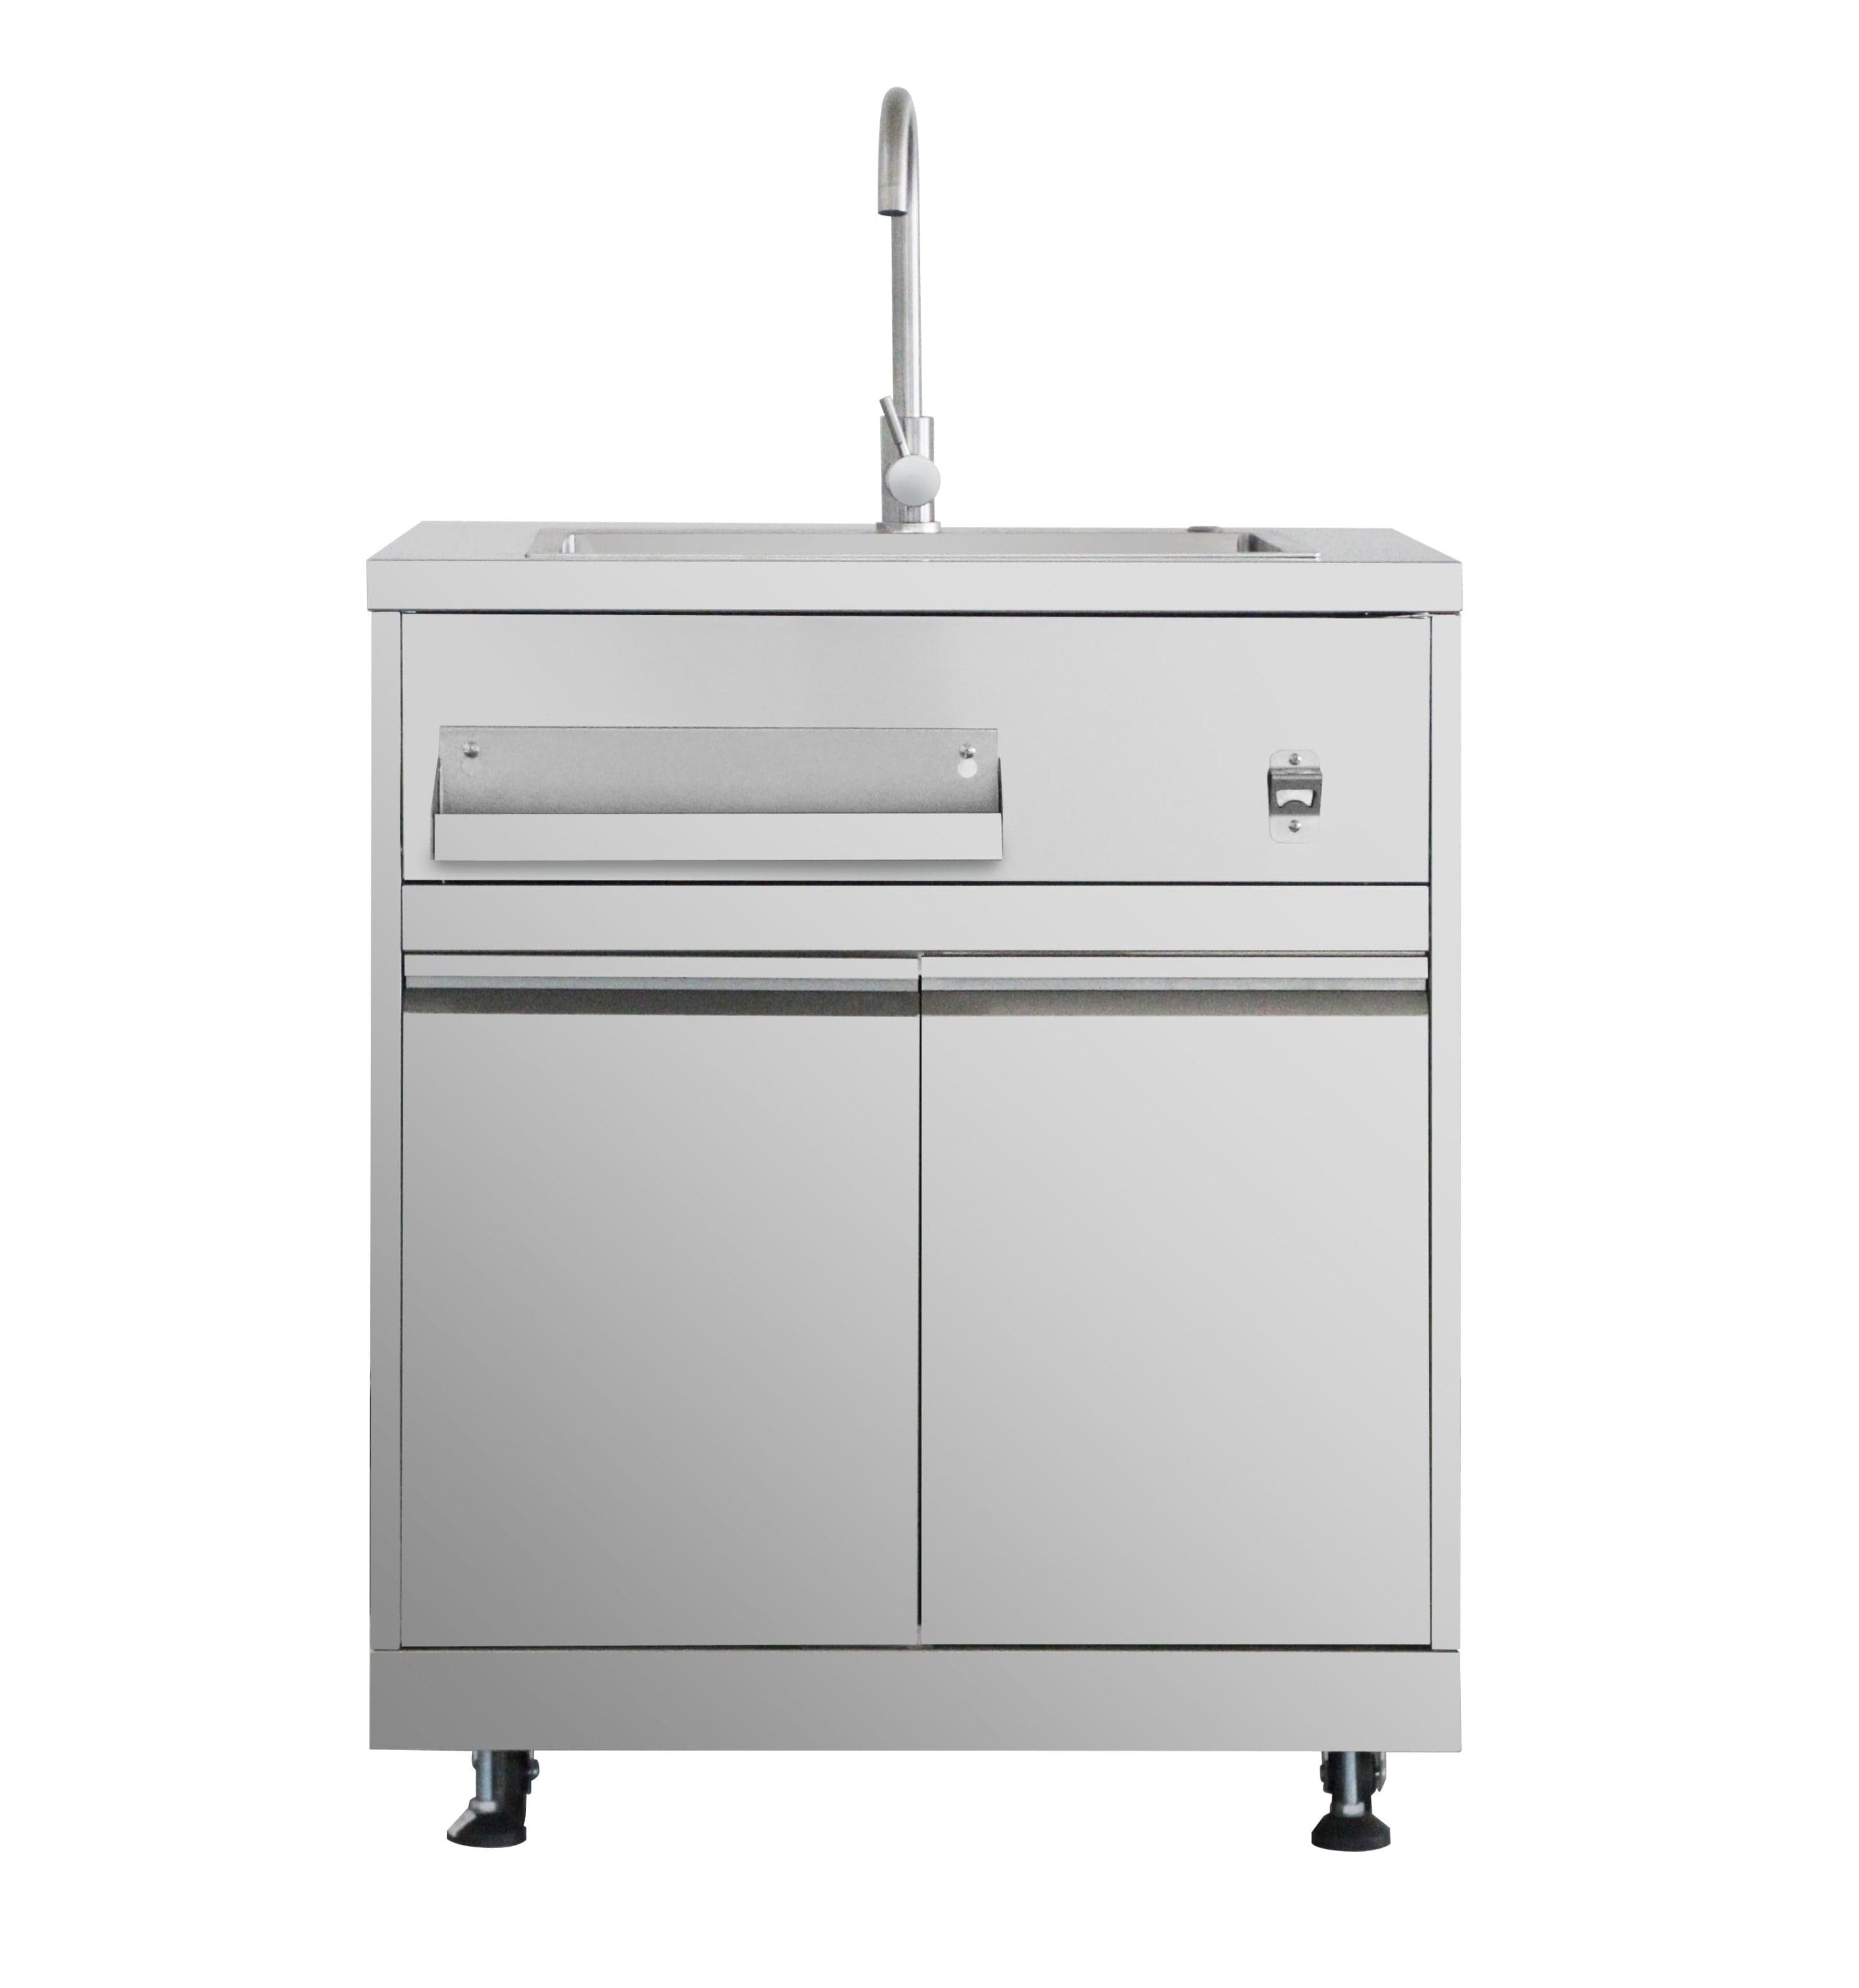 Thor Outdoor Kitchen Package with Propane Gas Grill and Refrigerator, AP-Outdoor-LP-R-6-A Outdoor Grill Package AP-Outdoor-LP-R-6-A Luxury Appliances Direct